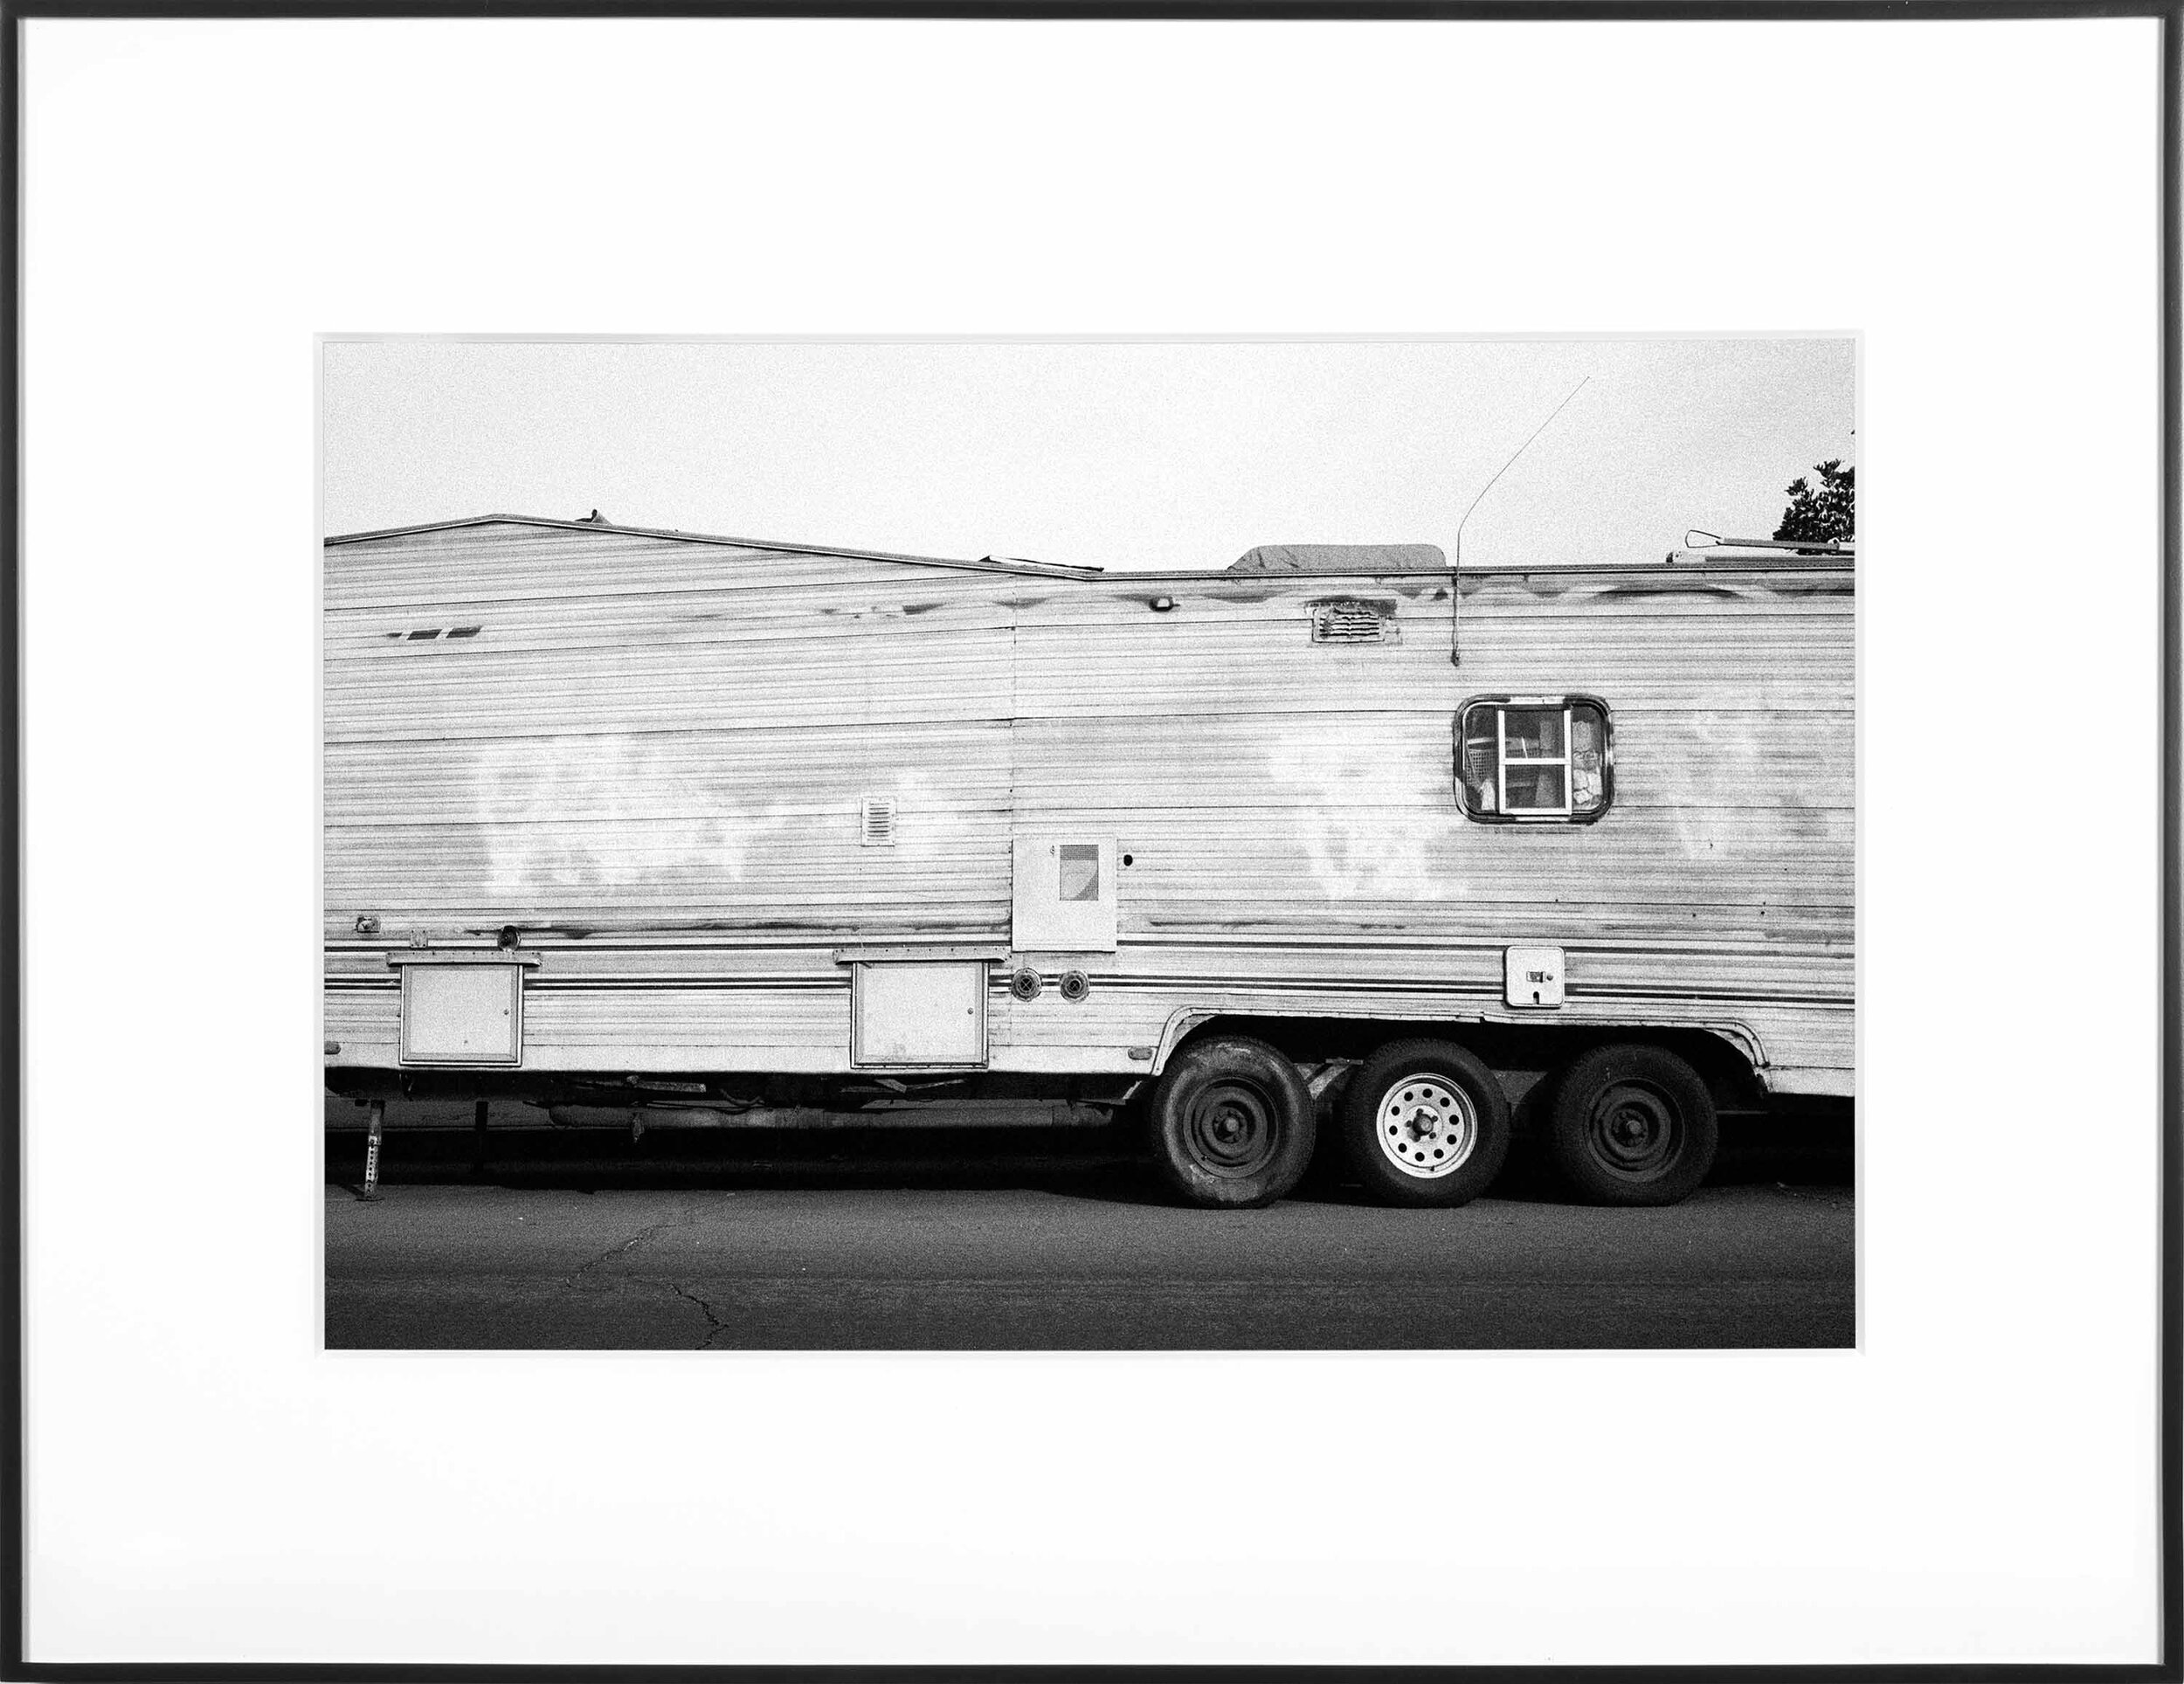   (Temporary) Homes for America: 3300 block to 4400 block, Union Pacific Avenue, between South Grande Vista Avenue and South Marianna Avenue, Los Angeles/Commerce, California, December 2020   2021  black and white fiber print  11 x 15 inches  Exhibit